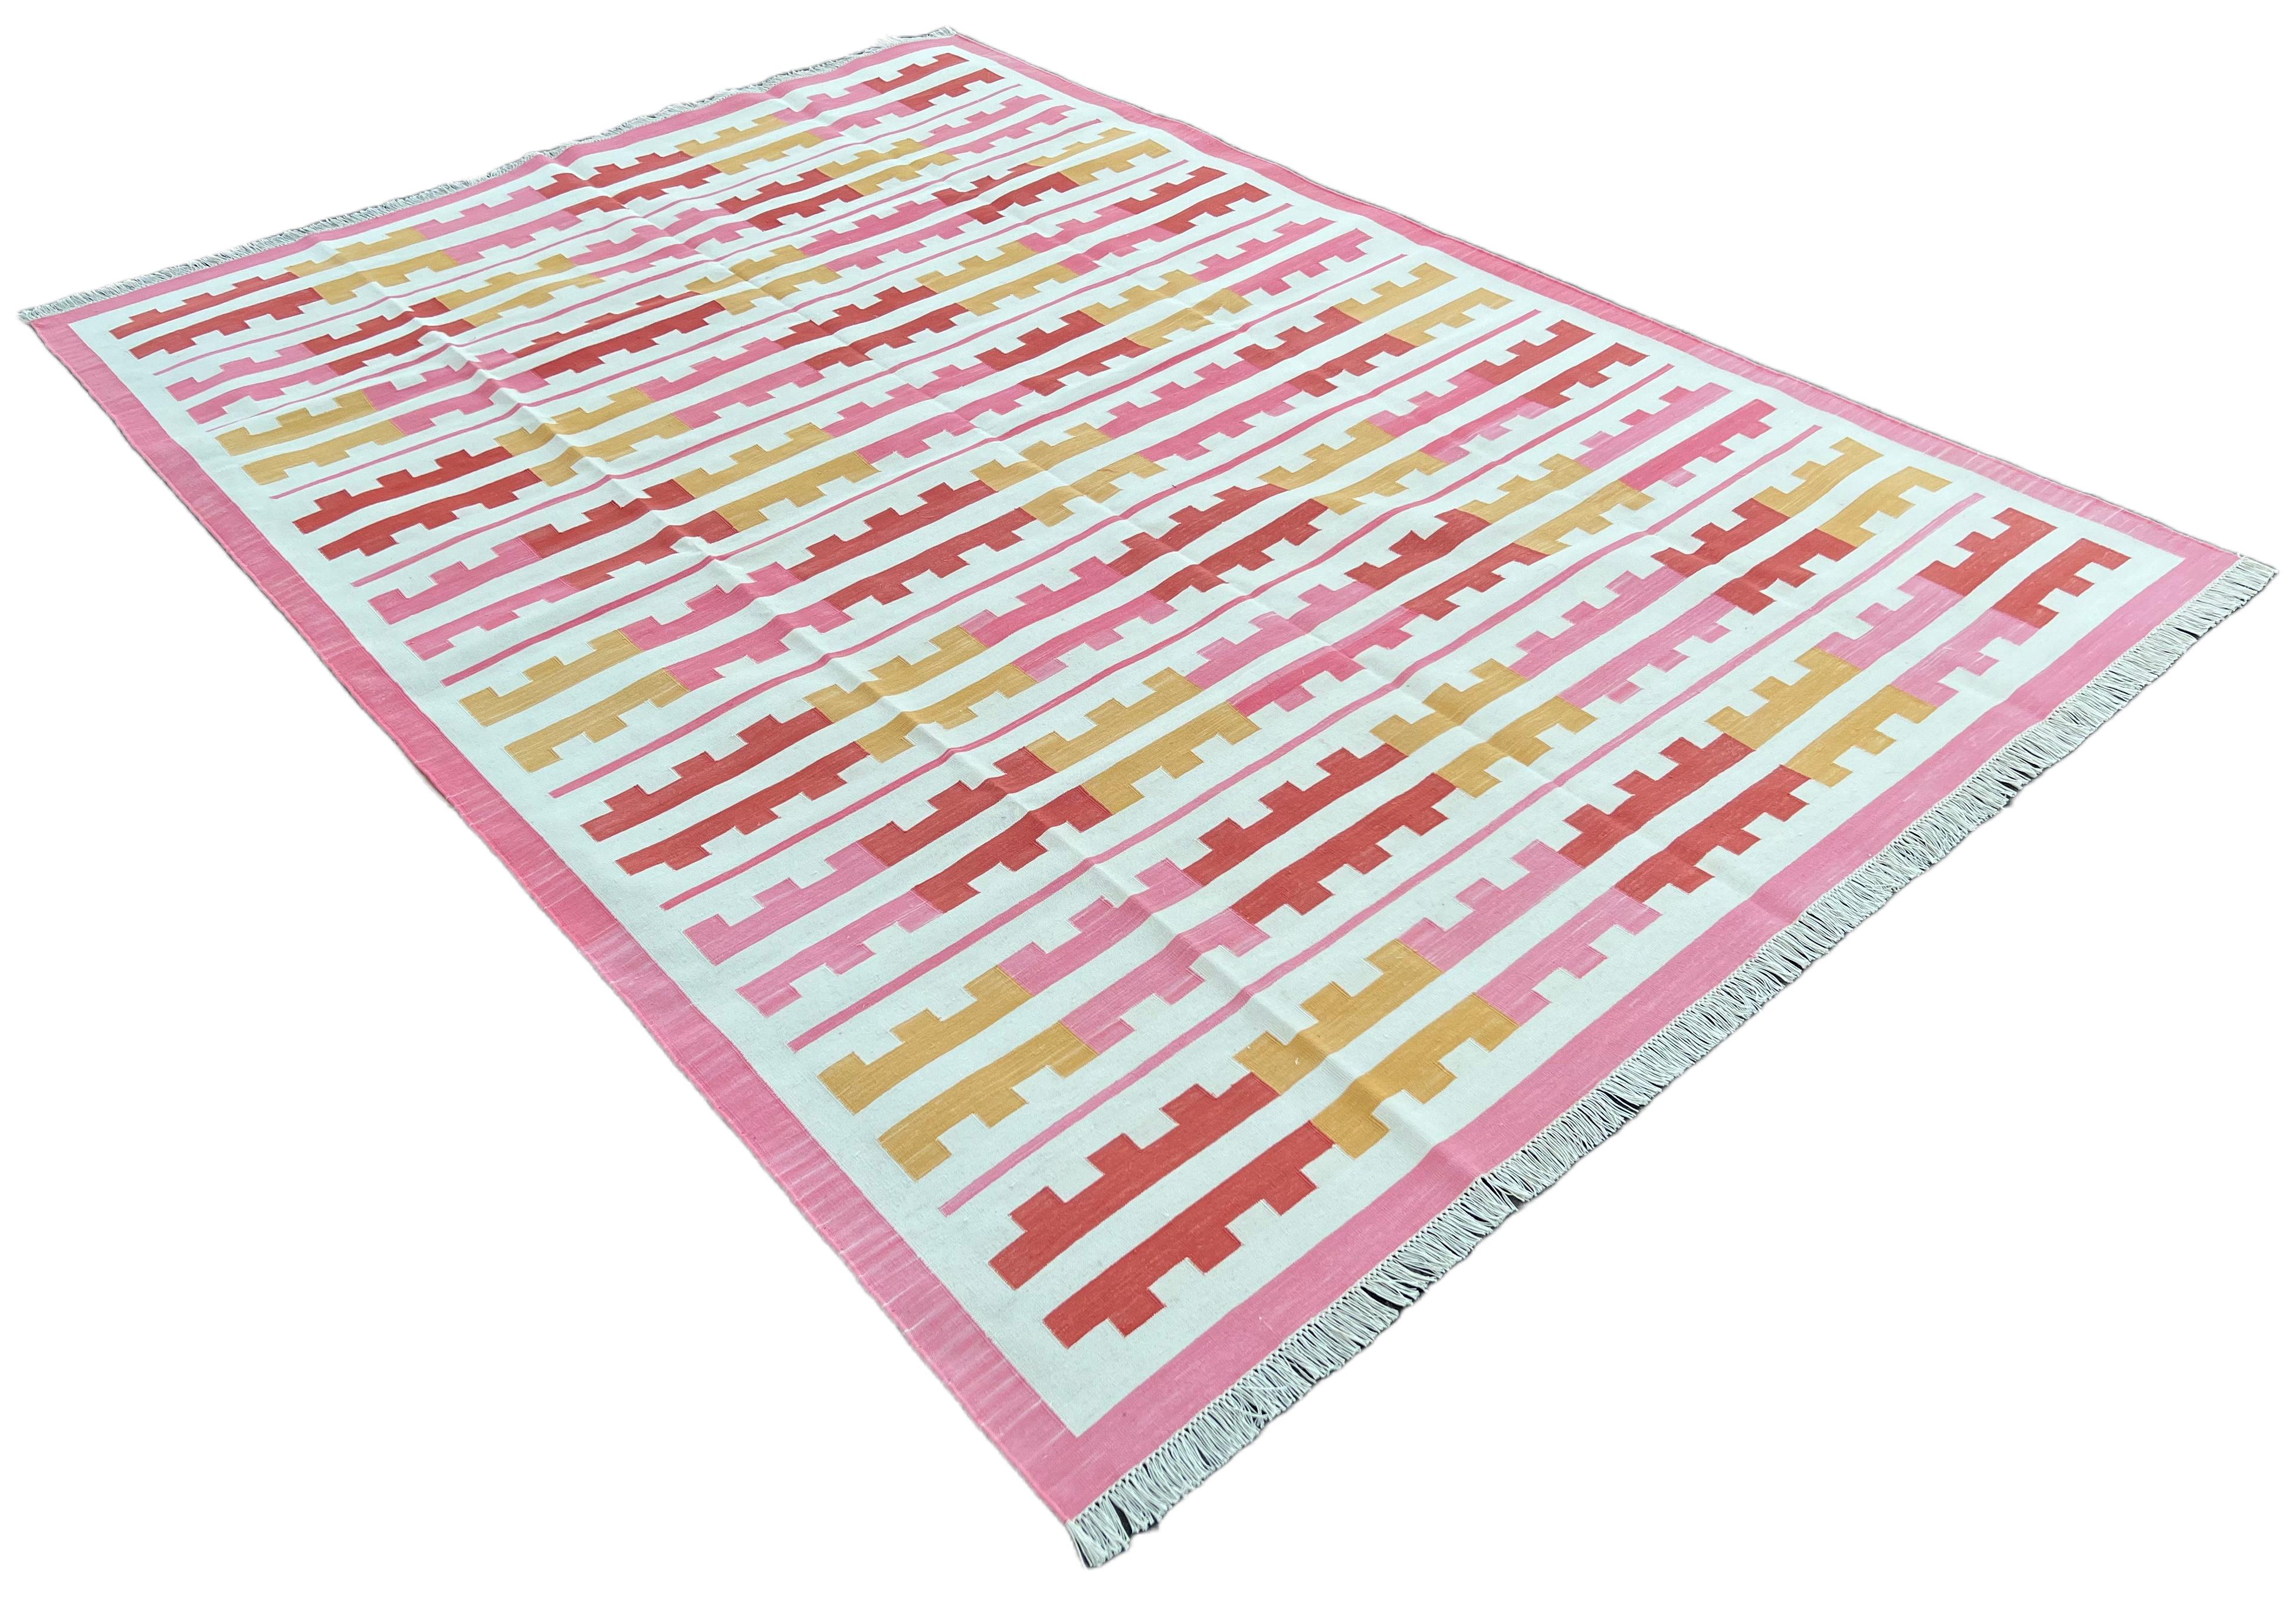 Cotton Vegetable Dyed Pink, Yellow, Cream and Coral Marianne Striped Indian Dhurrie Rug-6'x9' 

These special flat-weave dhurries are hand-woven with 15 ply 100% cotton yarn. Due to the special manufacturing techniques used to create our rugs, the